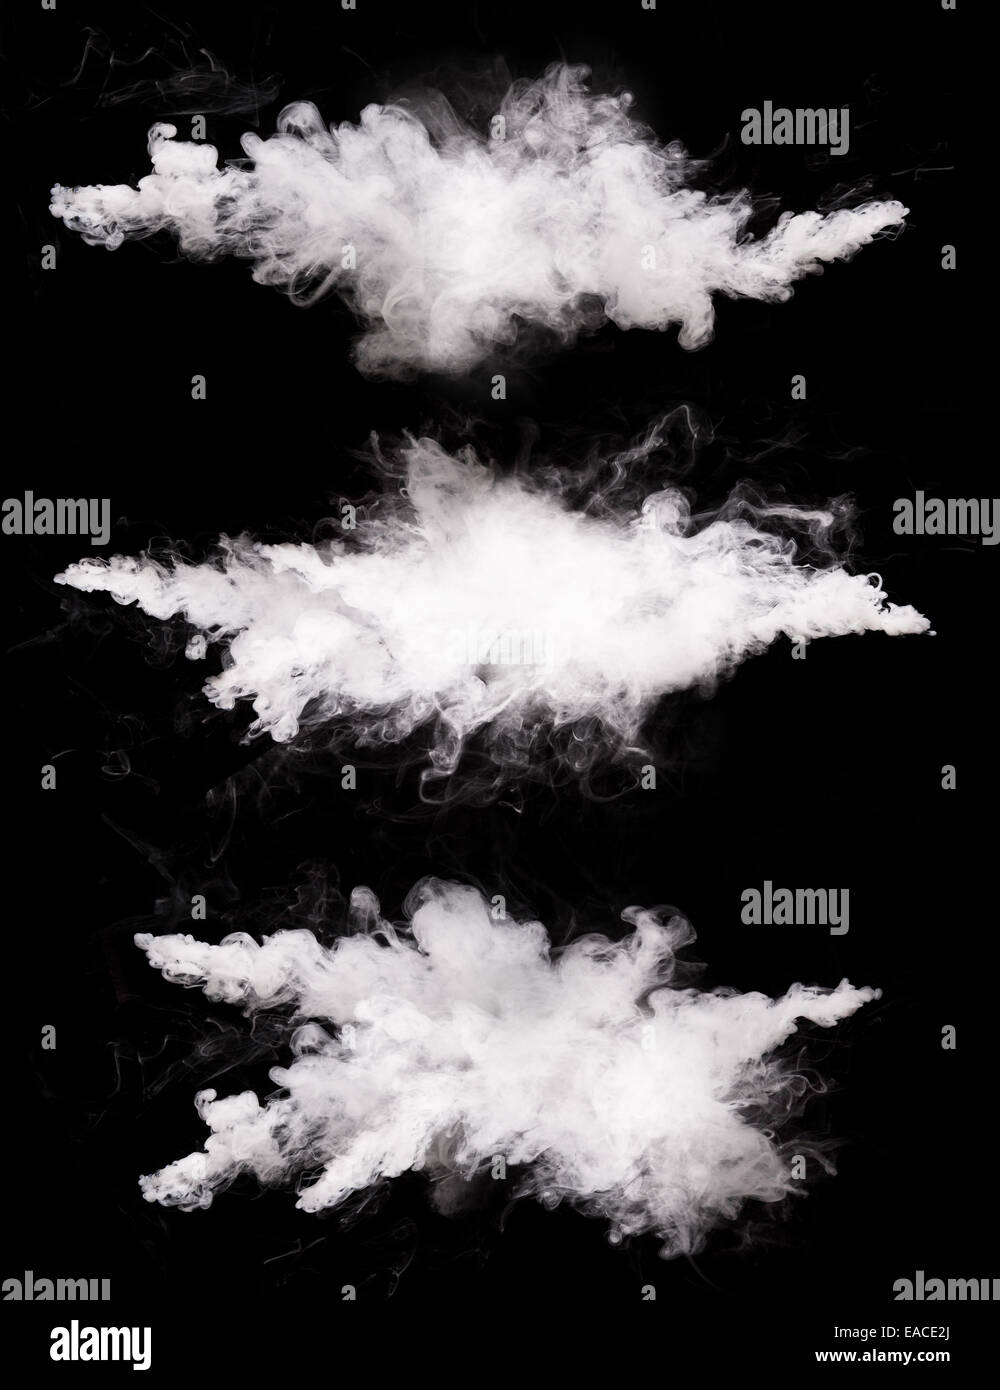 Freeze motions of white dust explosions isolated on black background Stock Photo